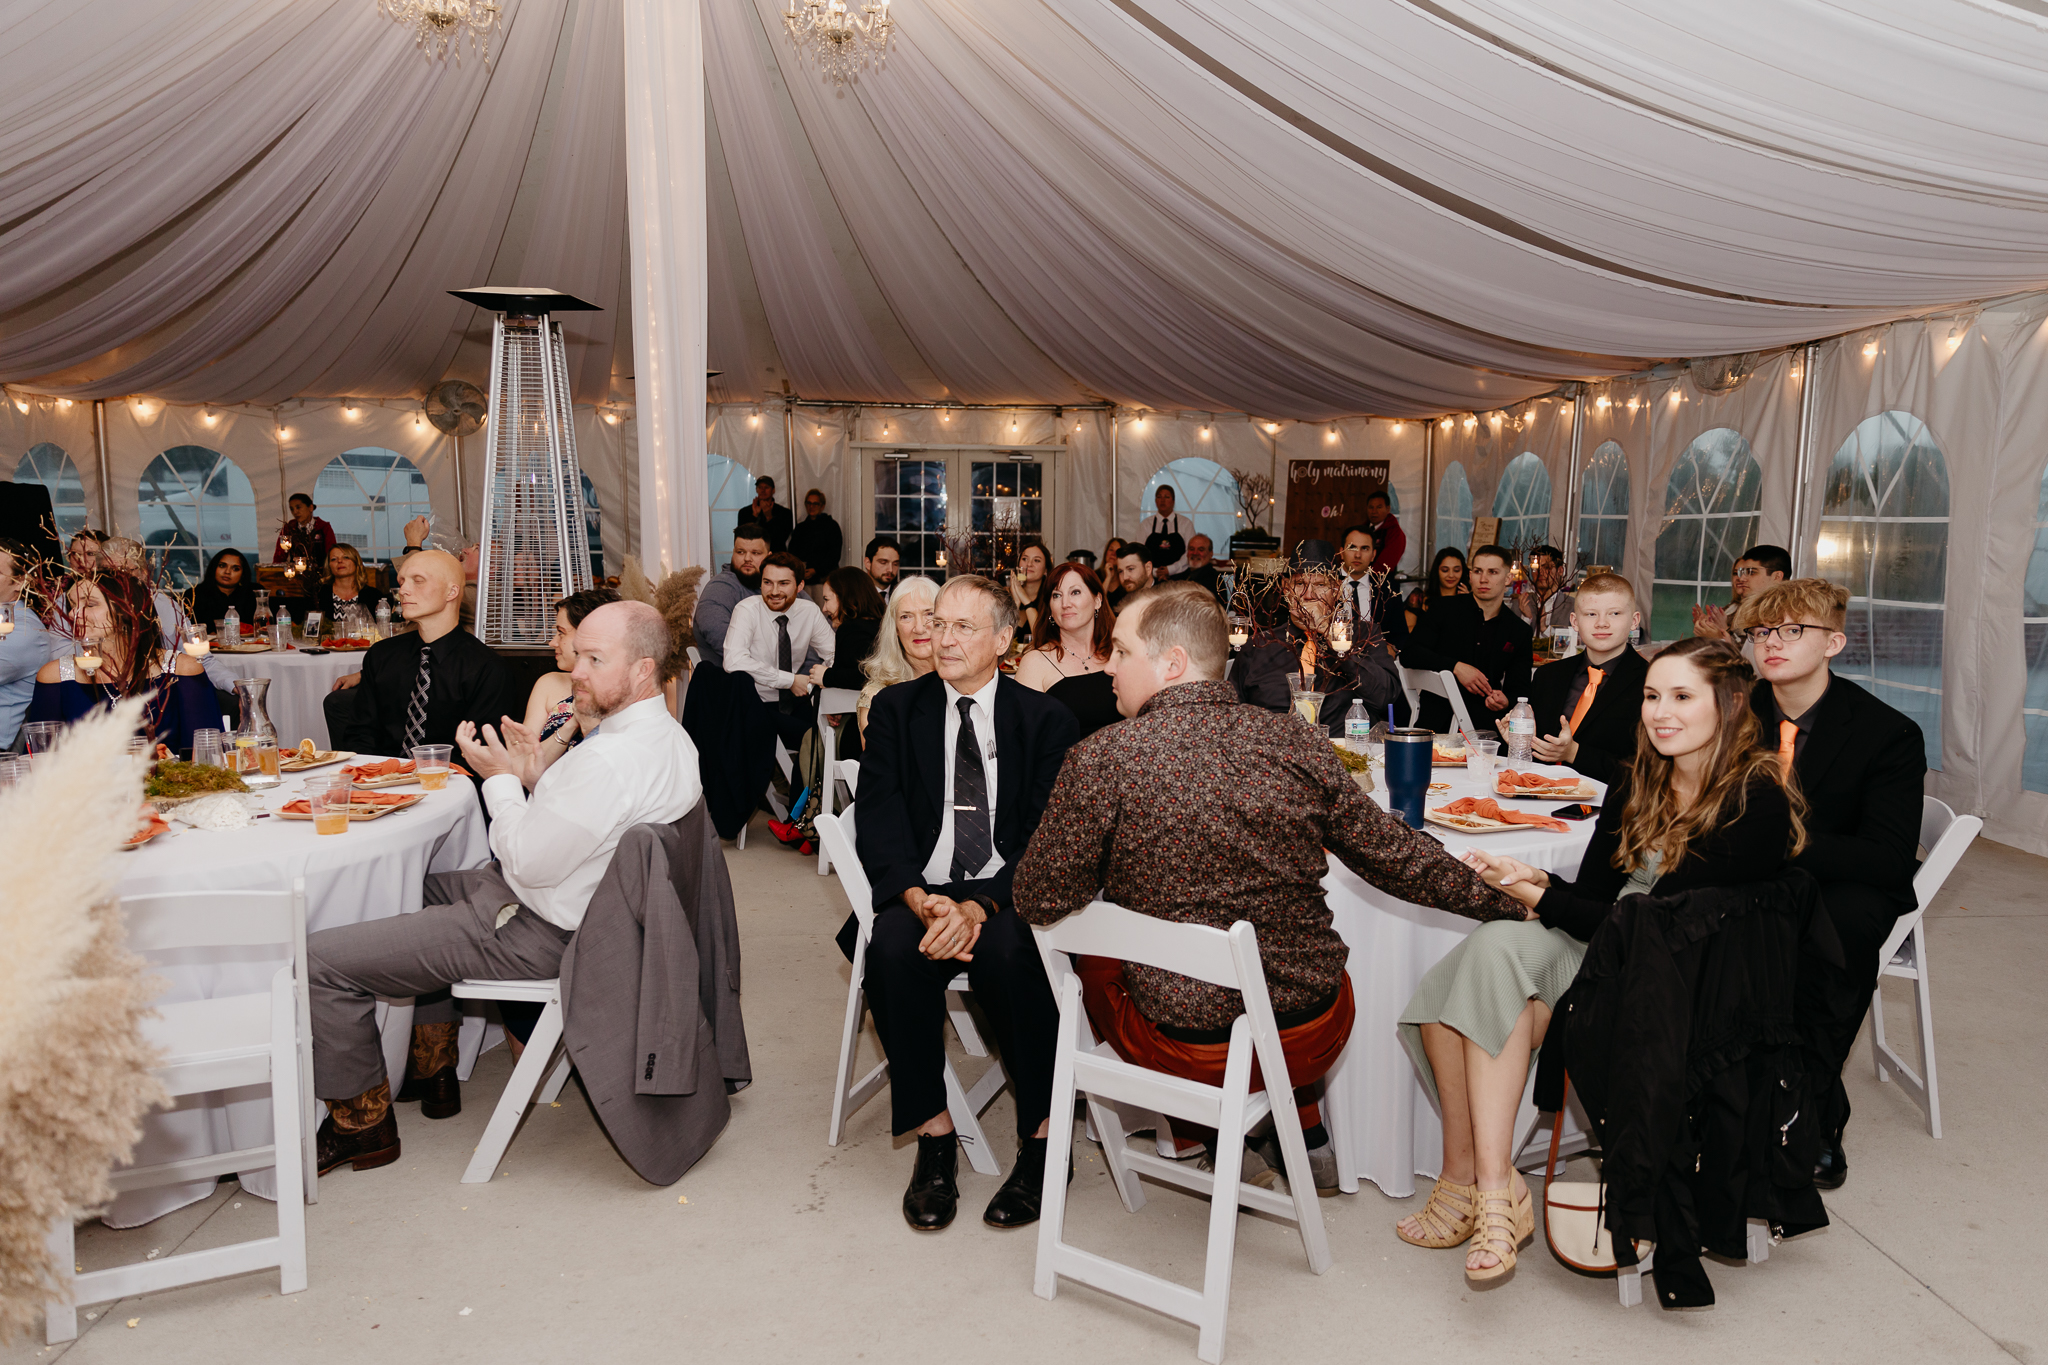 Wedding guests sit at round tables watching speeches in a white tent wedding